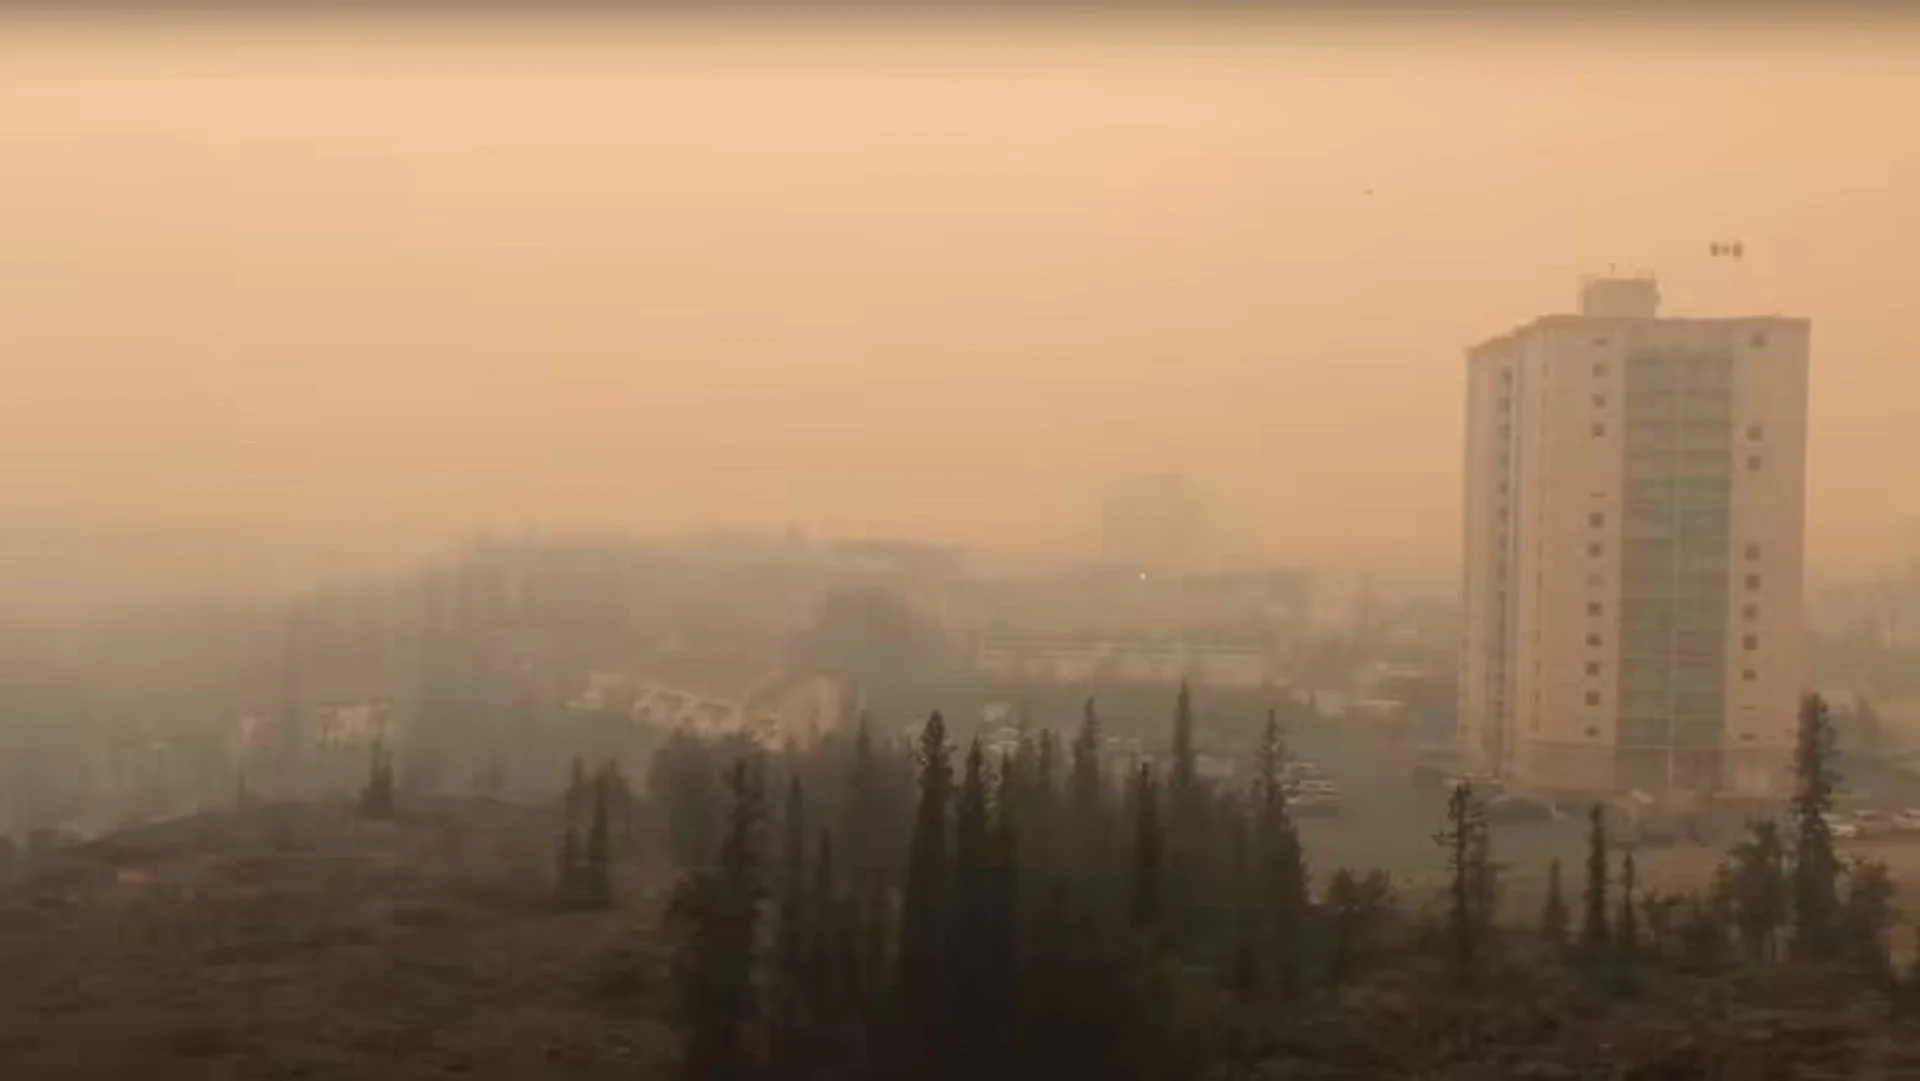 Wildfire breach of control lines west of Yellowknife now 'significant'